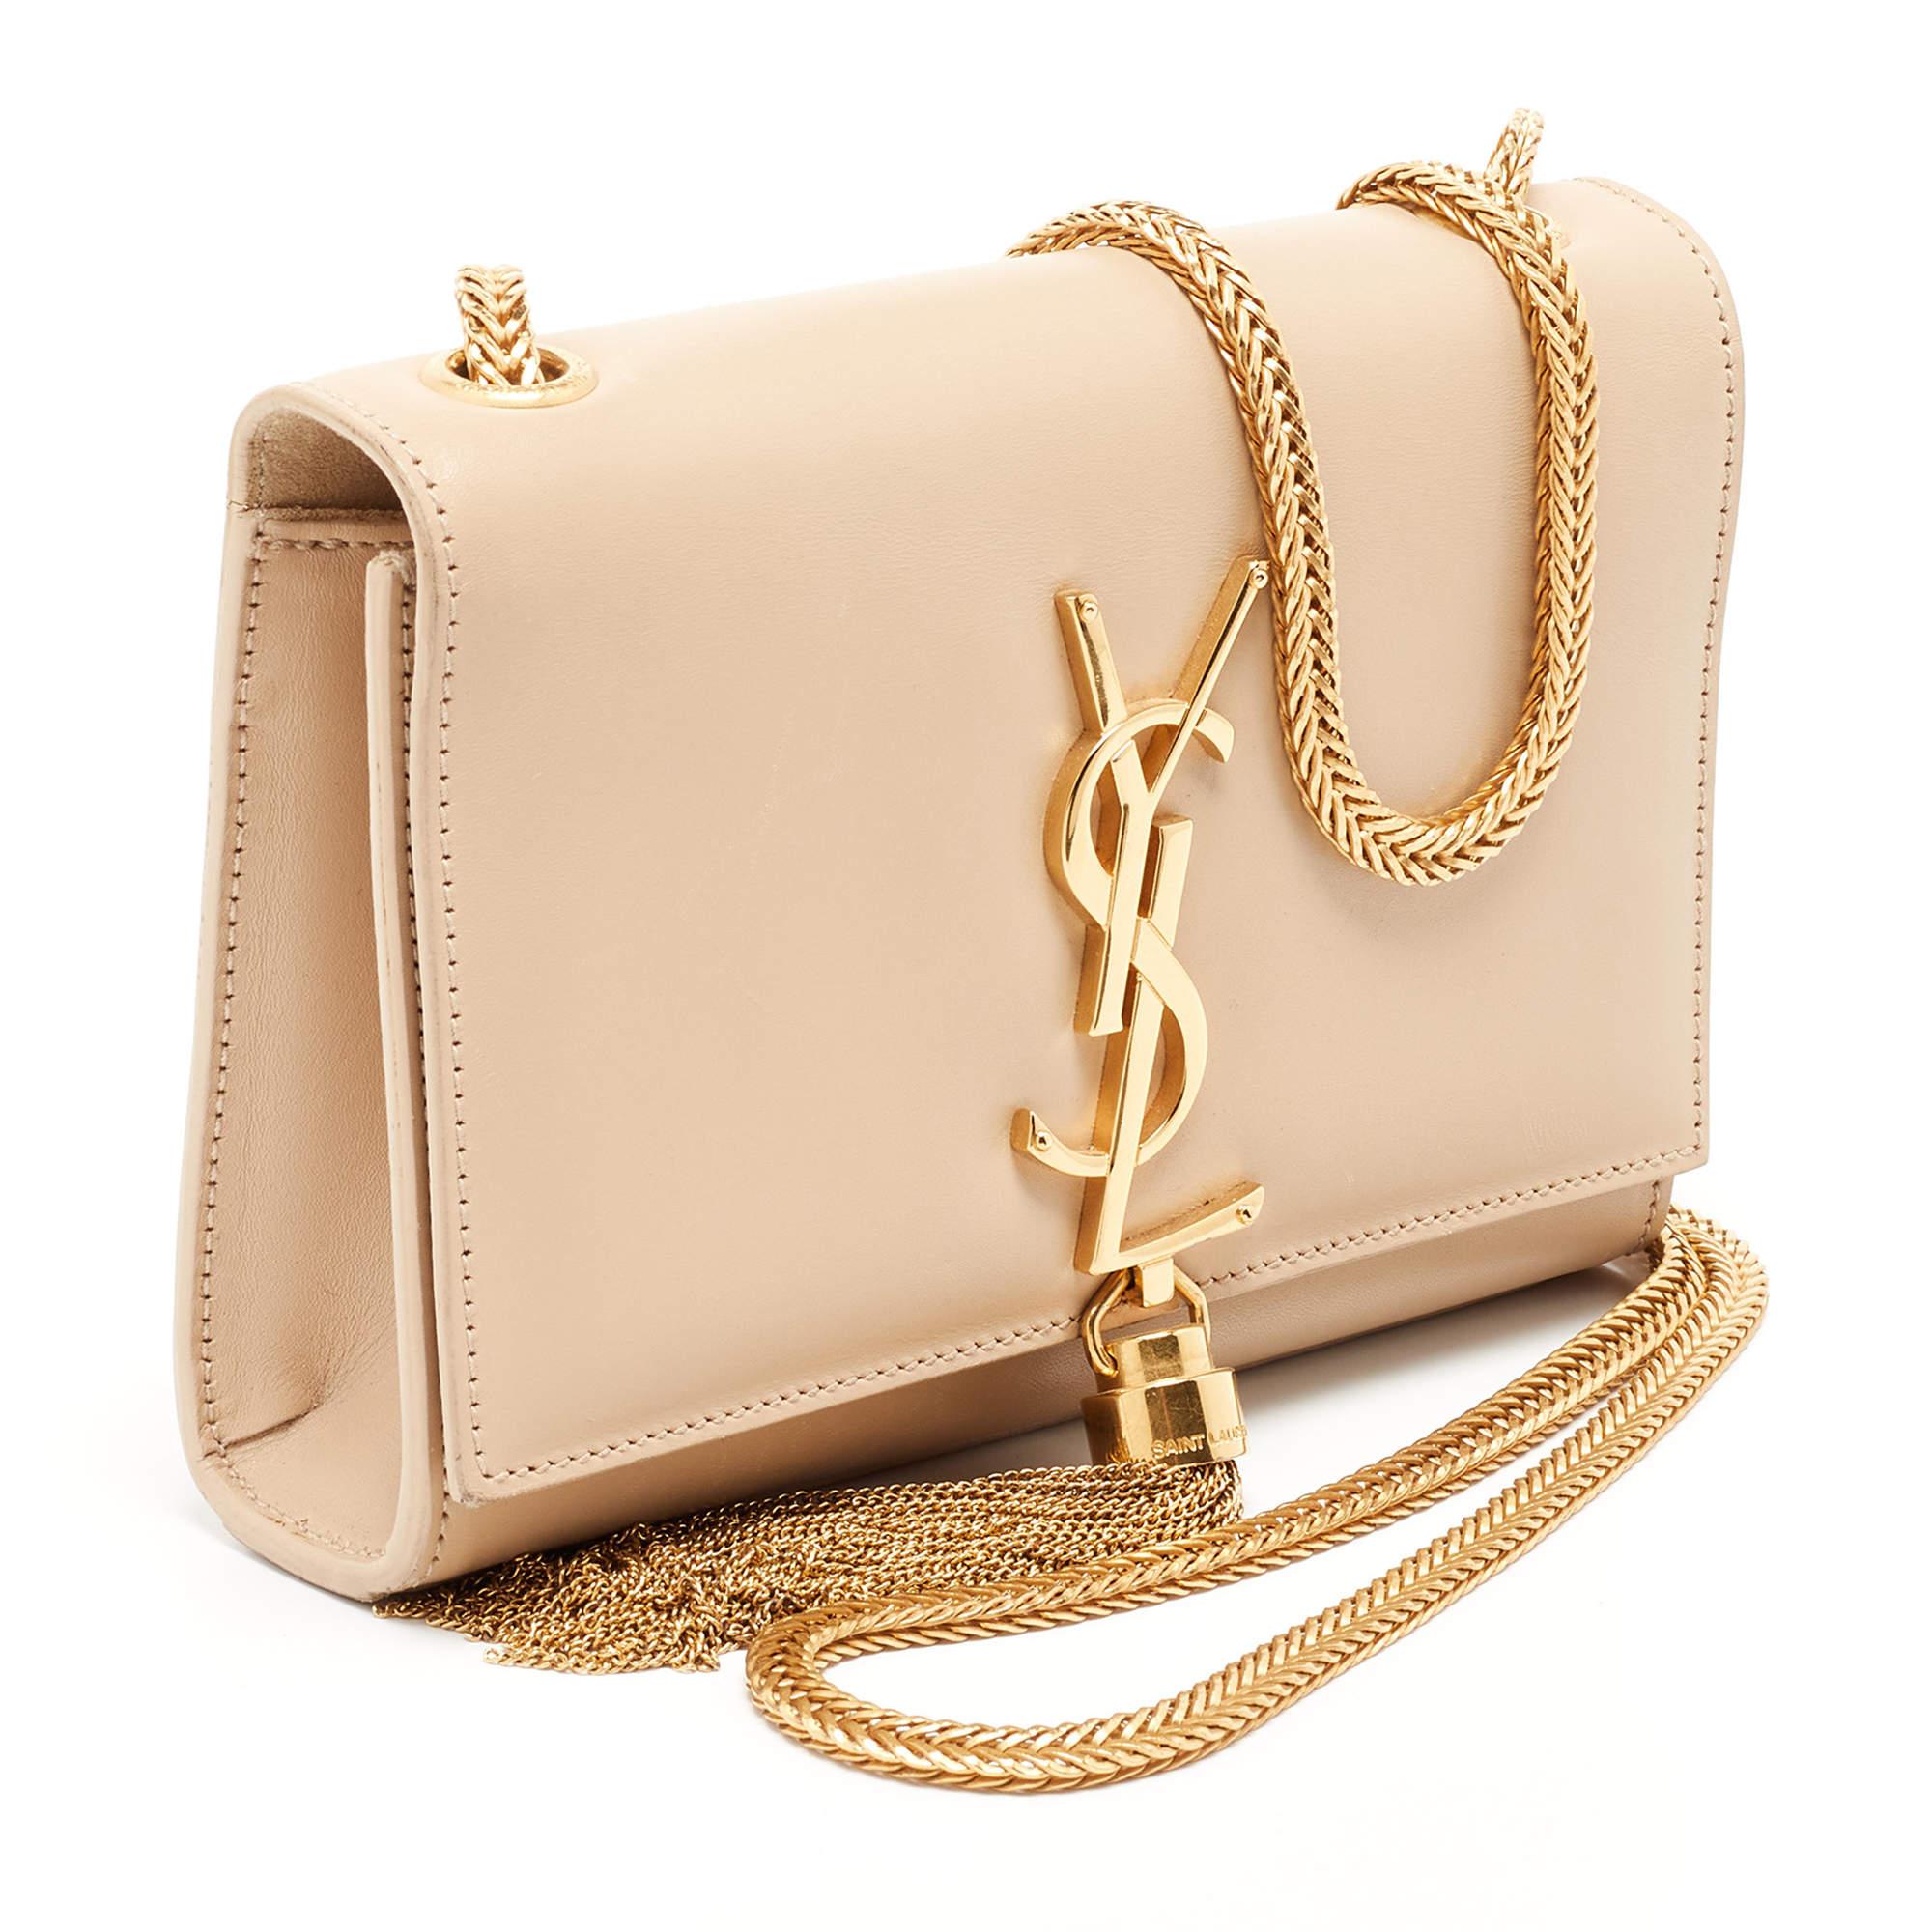 A charming companion for your next evening party, this Saint Laurent Kate bag is a well-crafted design. It can be carried around easily with a chain link and gets a luxe update with the brand signature on the front. Created from beige leather, it is